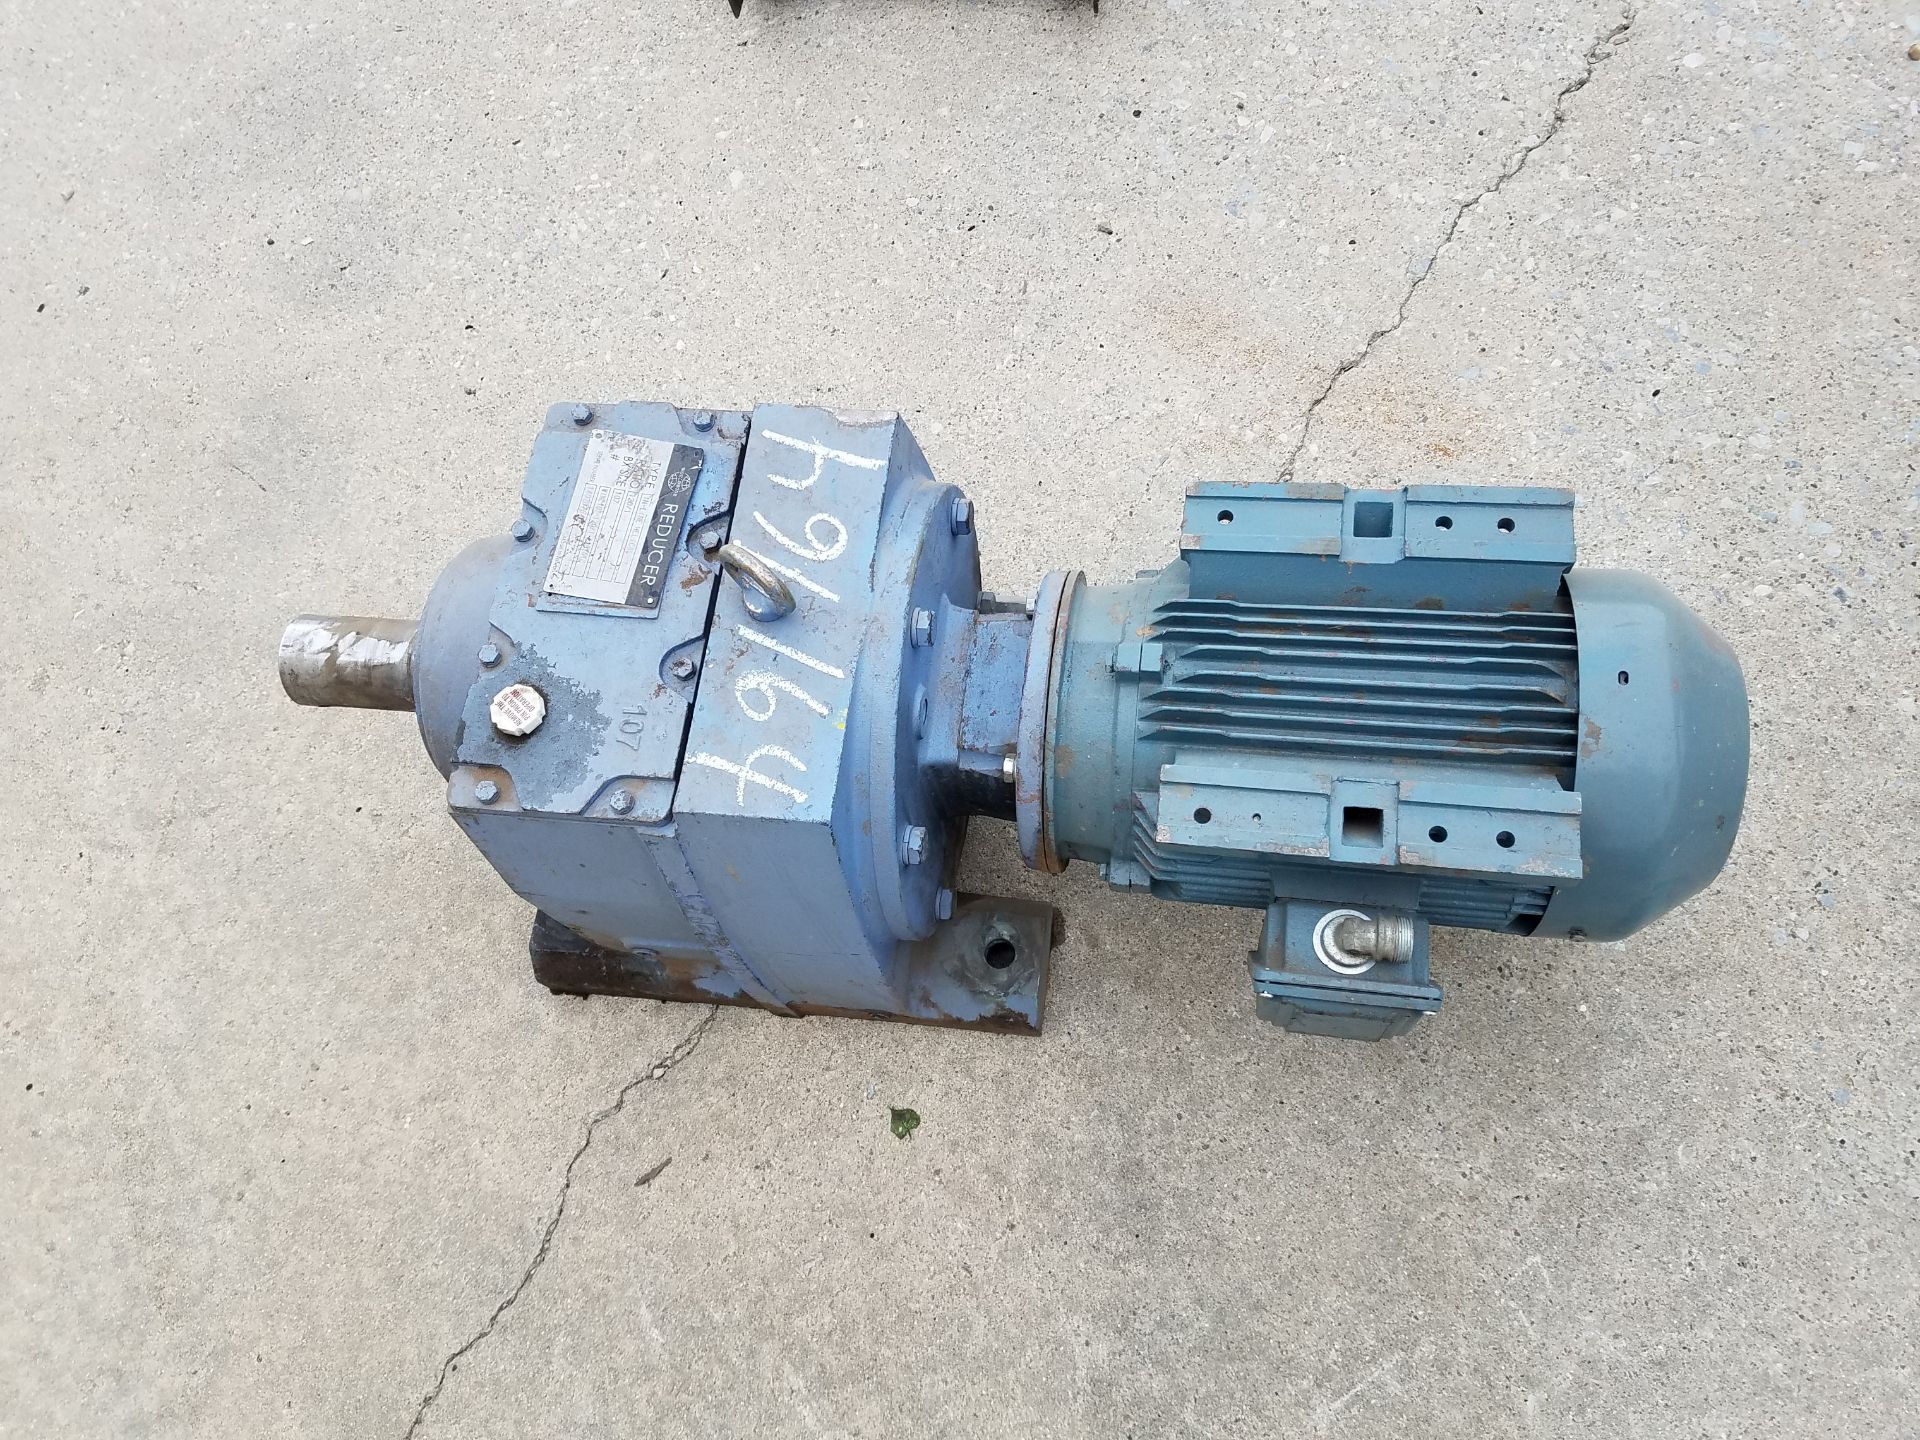 120 TO 1 GEAR REDUCERS